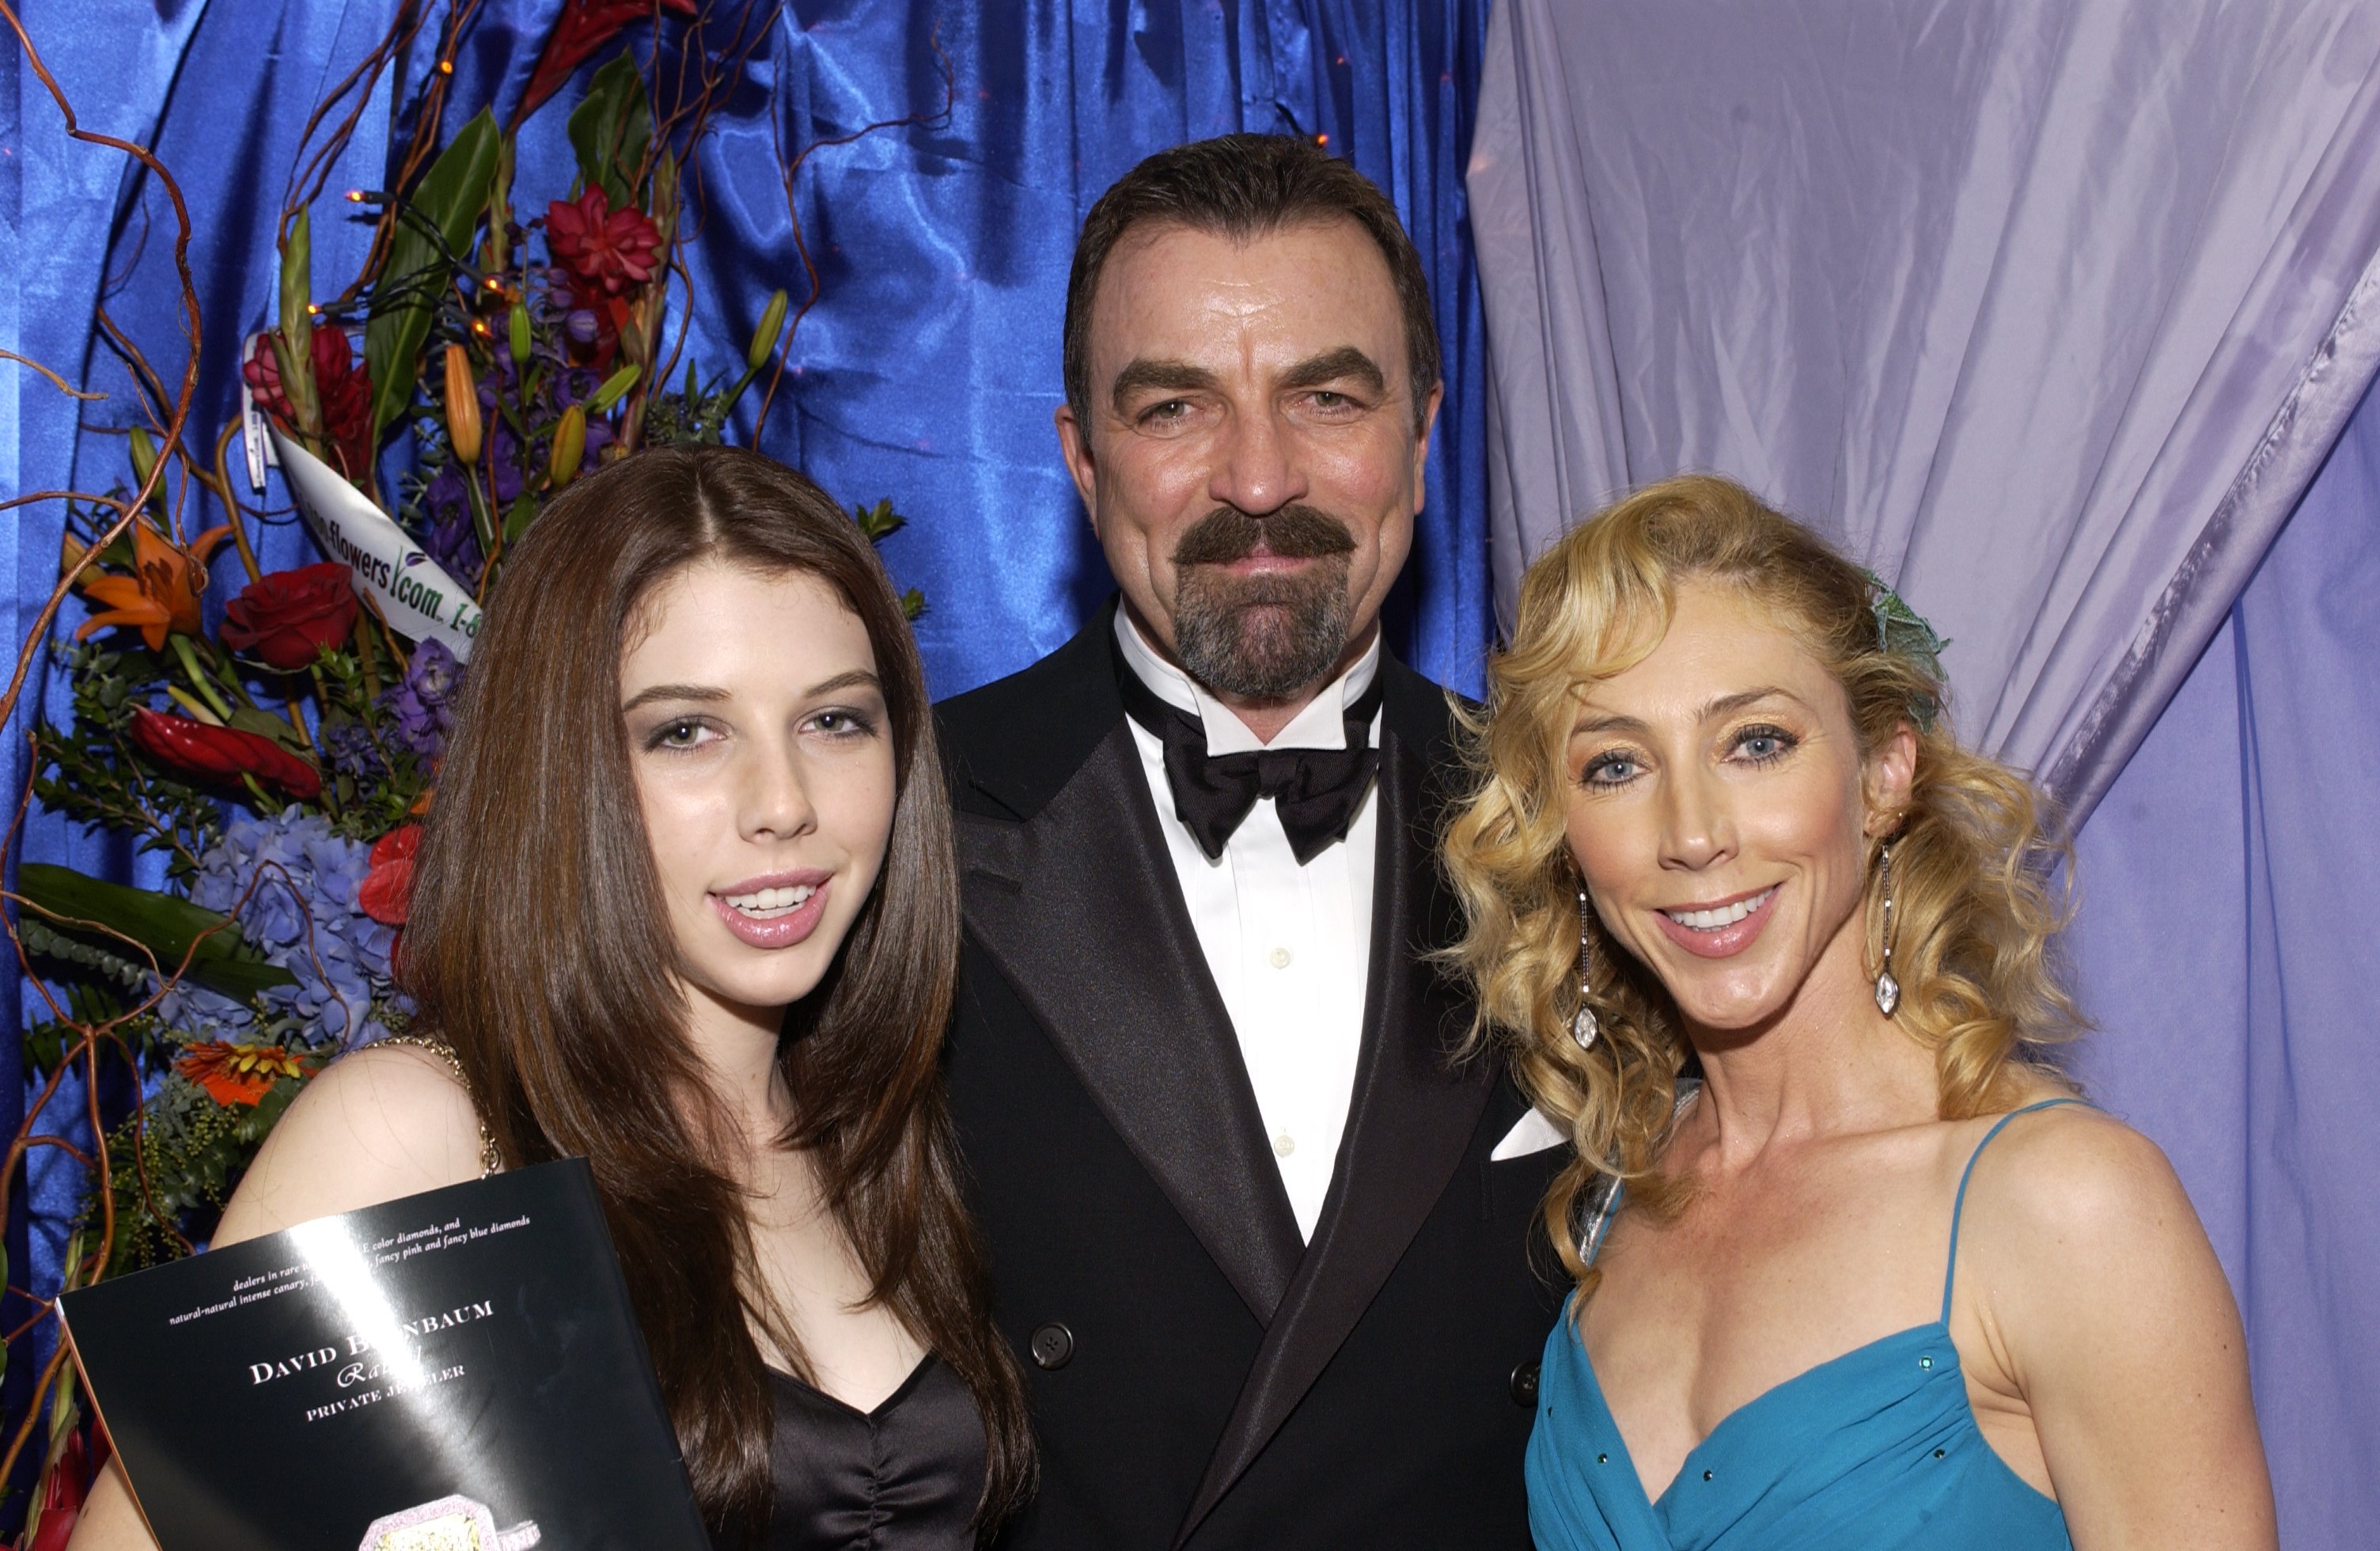 Tom Selleck with his daughter Hannah and wife Jillie Mack is seen at the Special Property Gallery during the People's Choice Awards Ceremony at the Pasadena Civic Auditorium on January 9, 2005 in Pasadena, California |  Photo: Getty Images